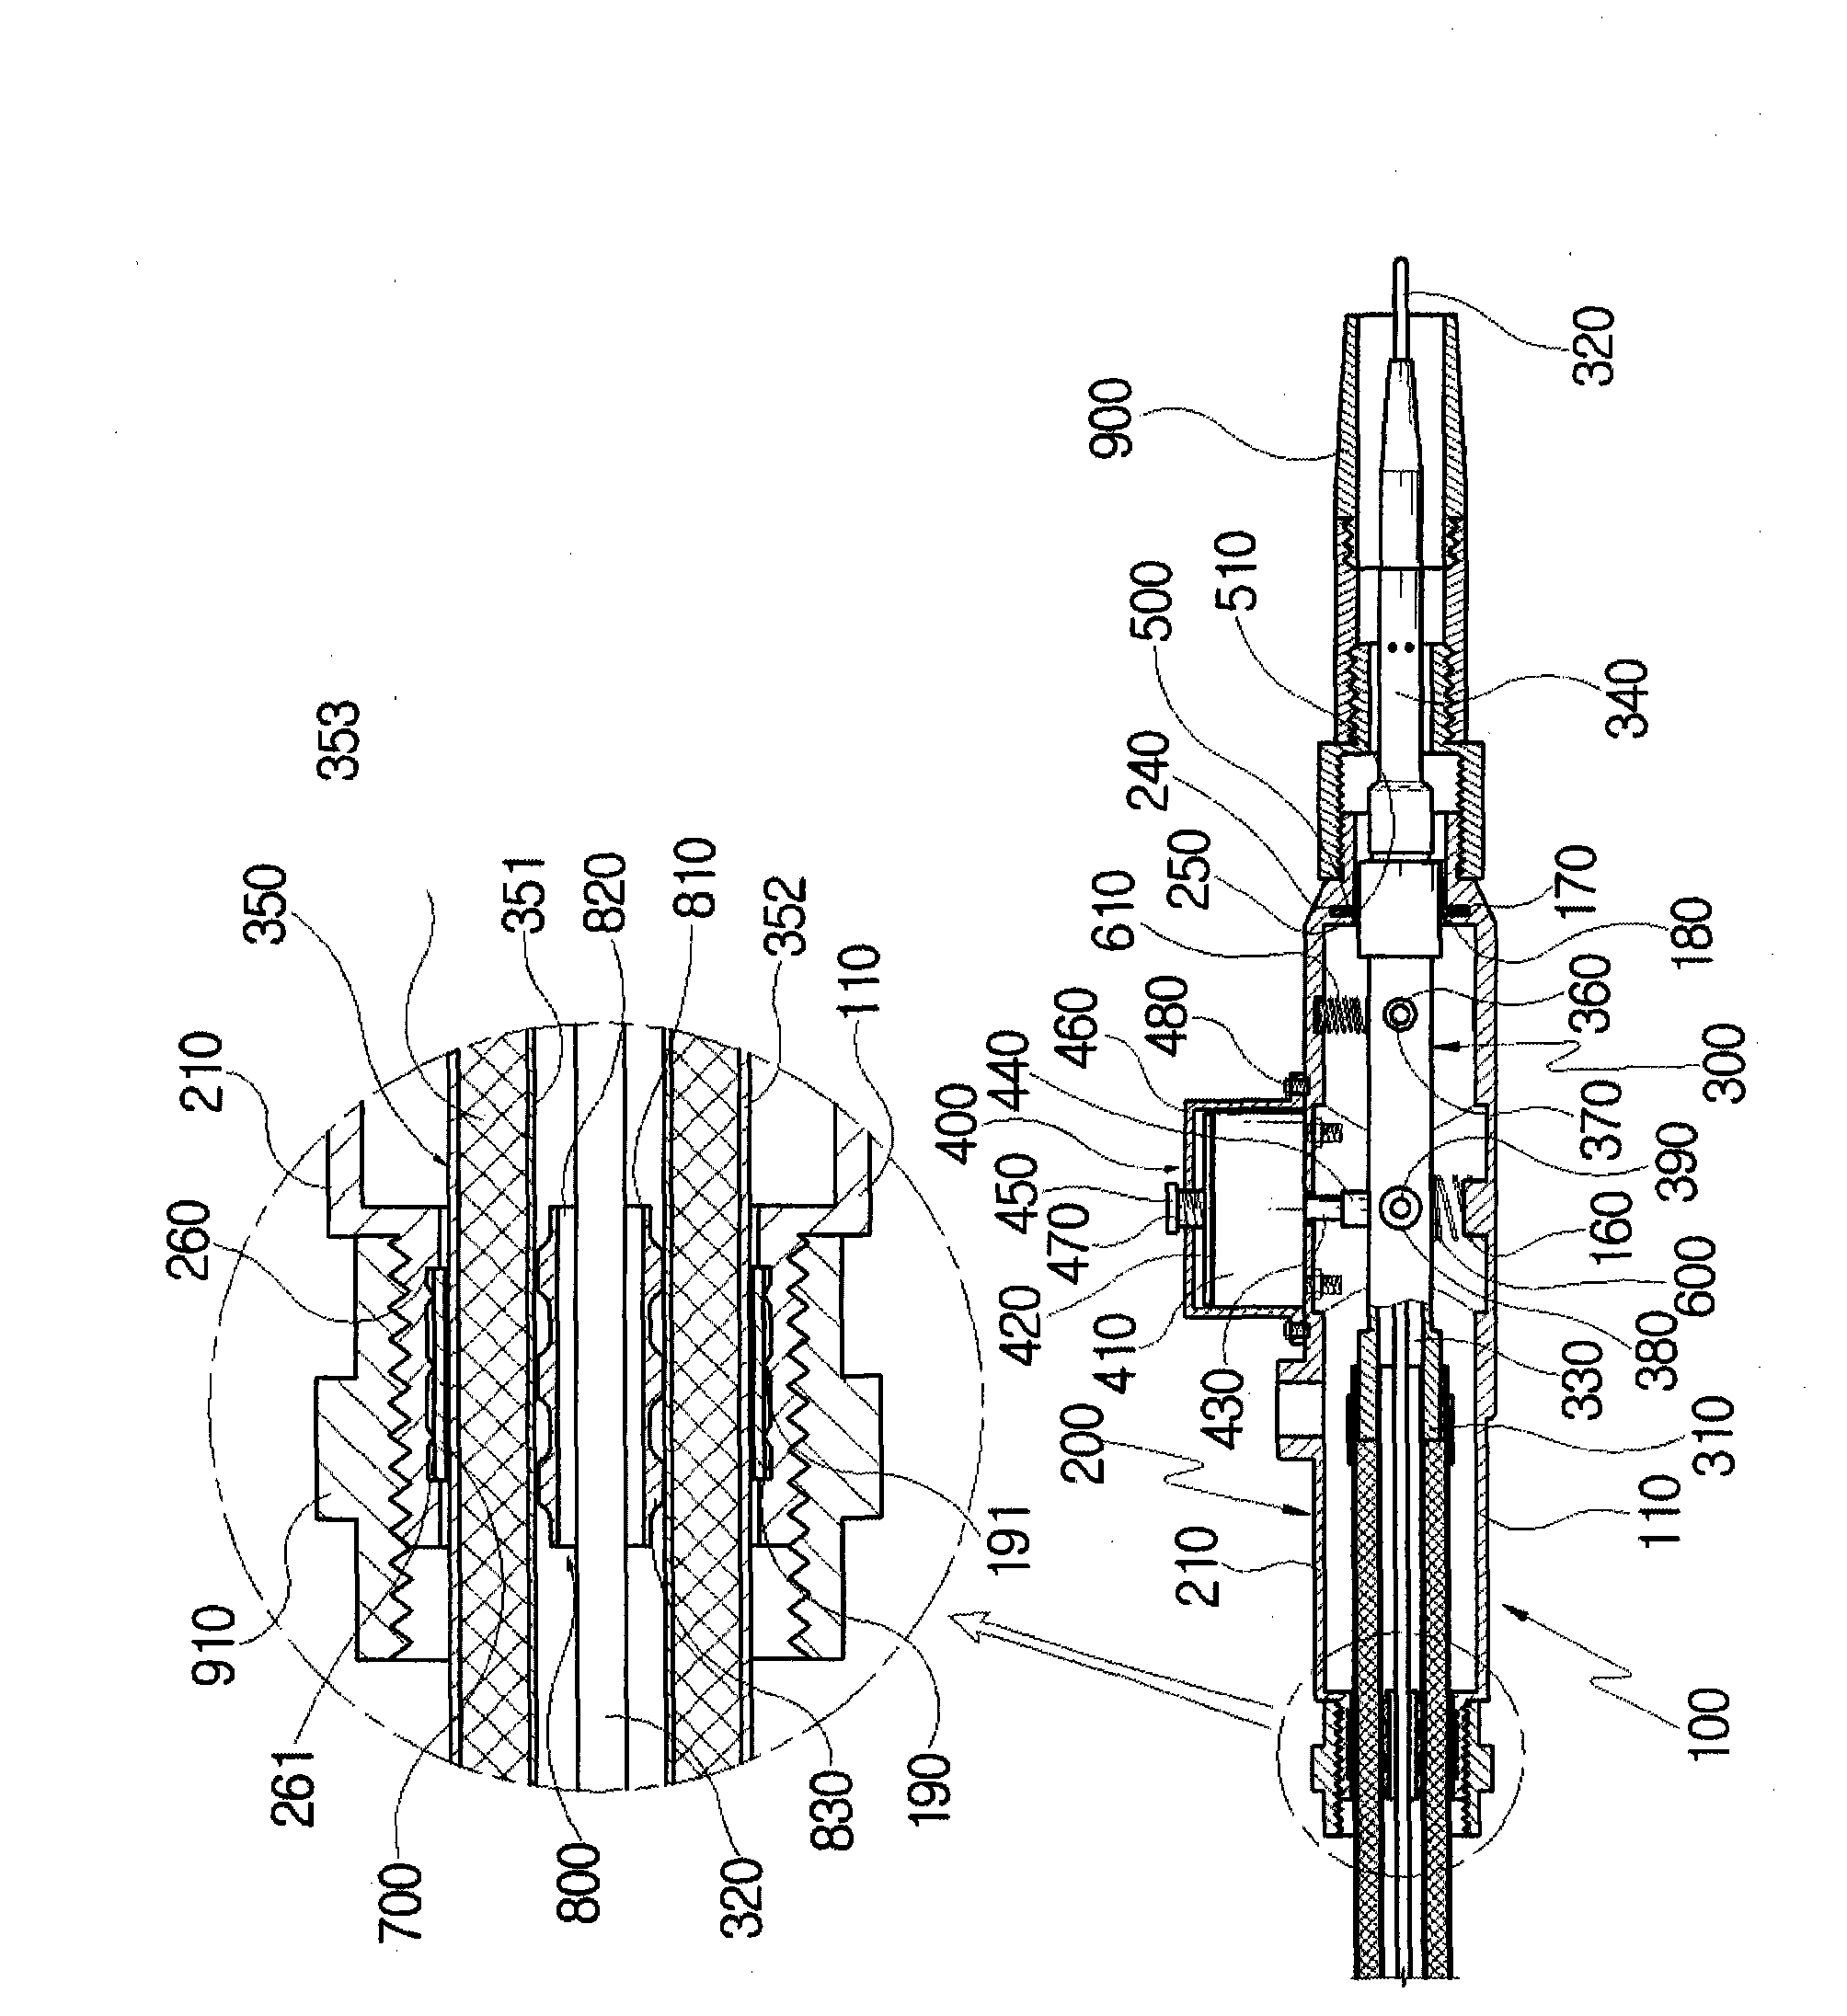 Weaving torch device for auto wellding